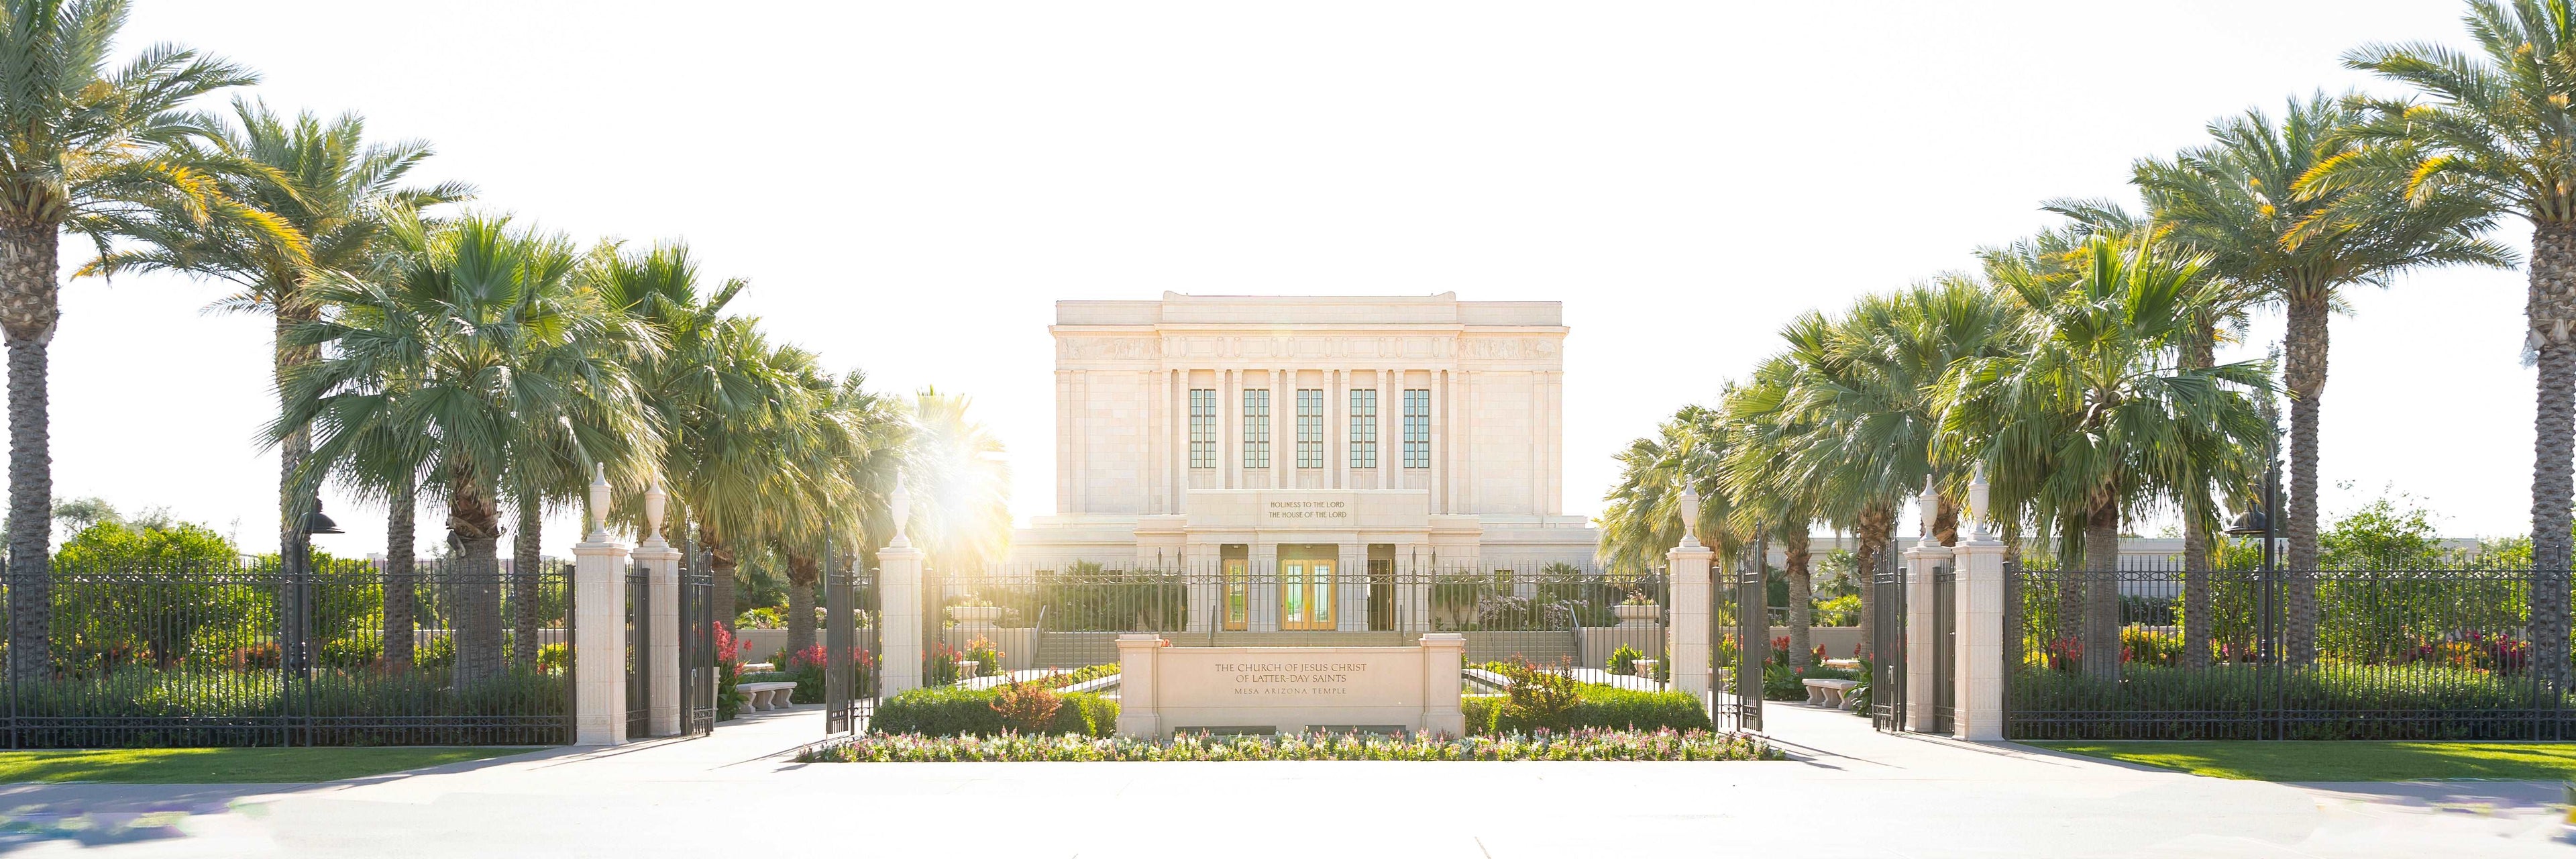 Standing at attention along the entrance to the Mesa, Arizona Temple, glorious palm trees show the way. Light filtering through reflects the beauty of the grounds and the light found inside the sacred building. LDS ART. LDS Temple. Jesus Christ Temple. 